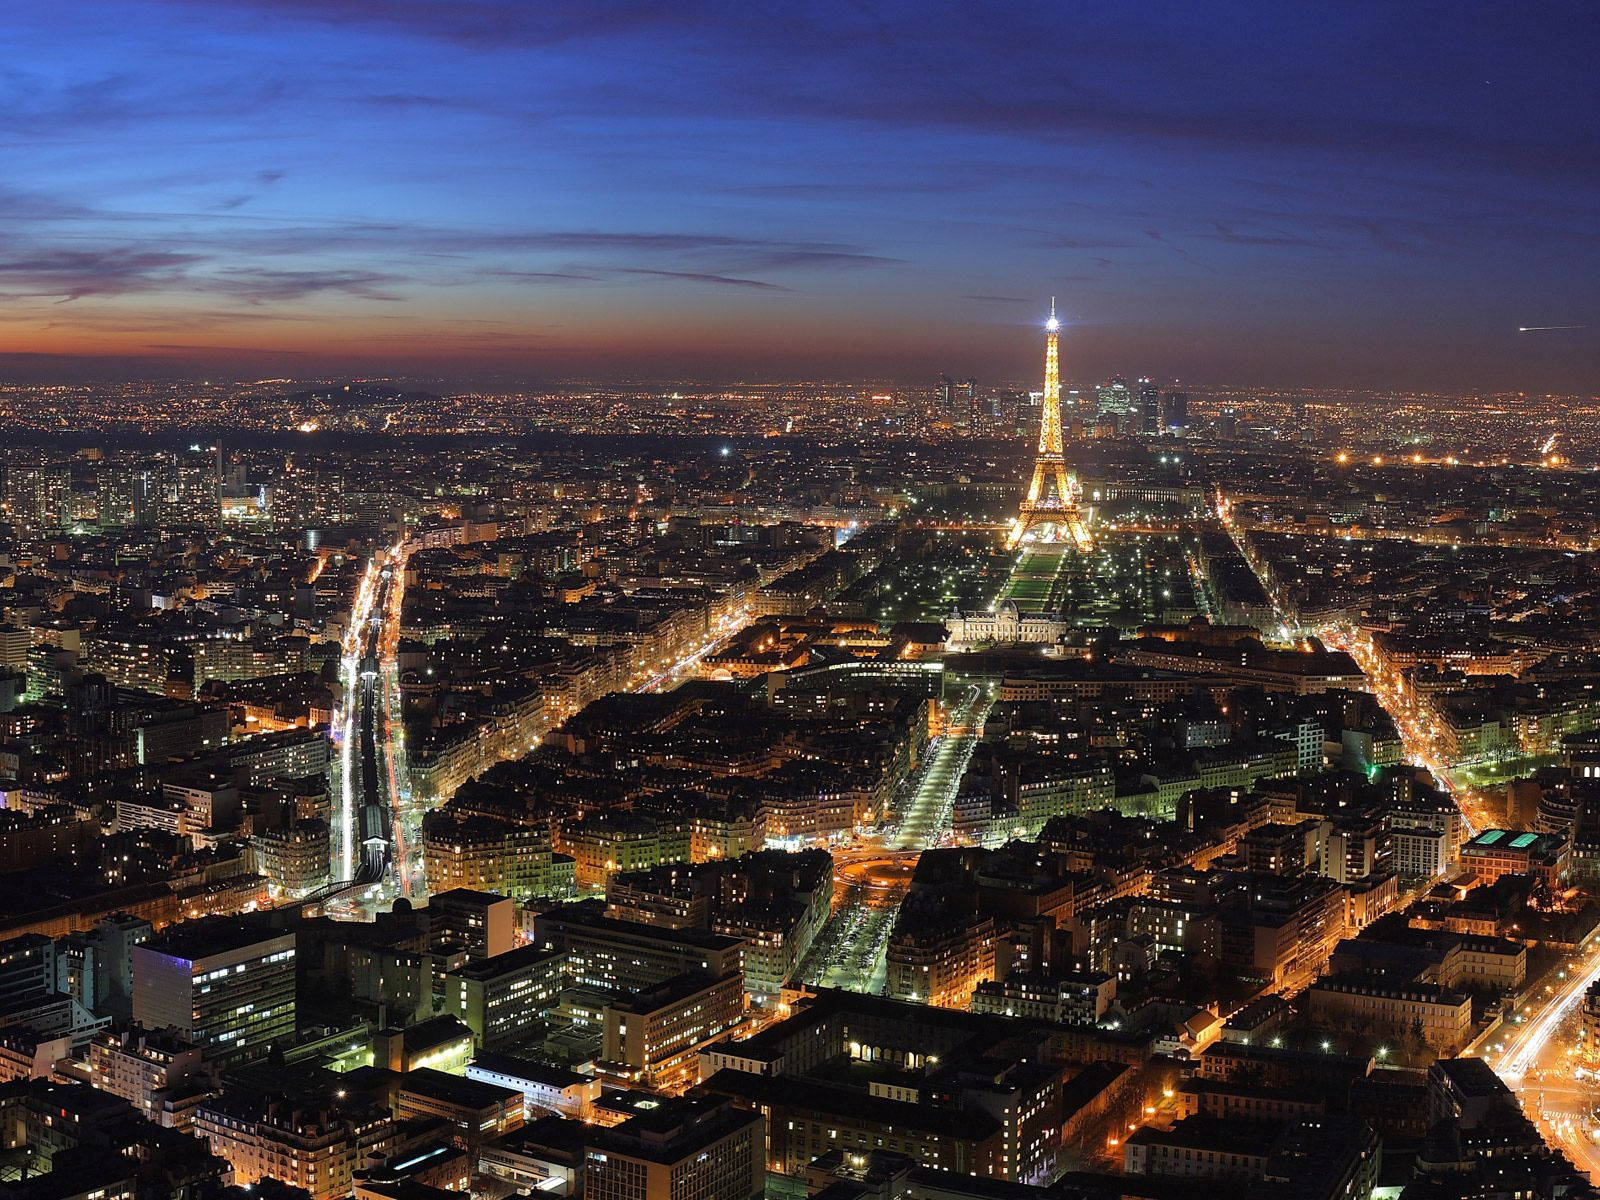 Aerial night view of the city of lights - Paris, France Wallpaper